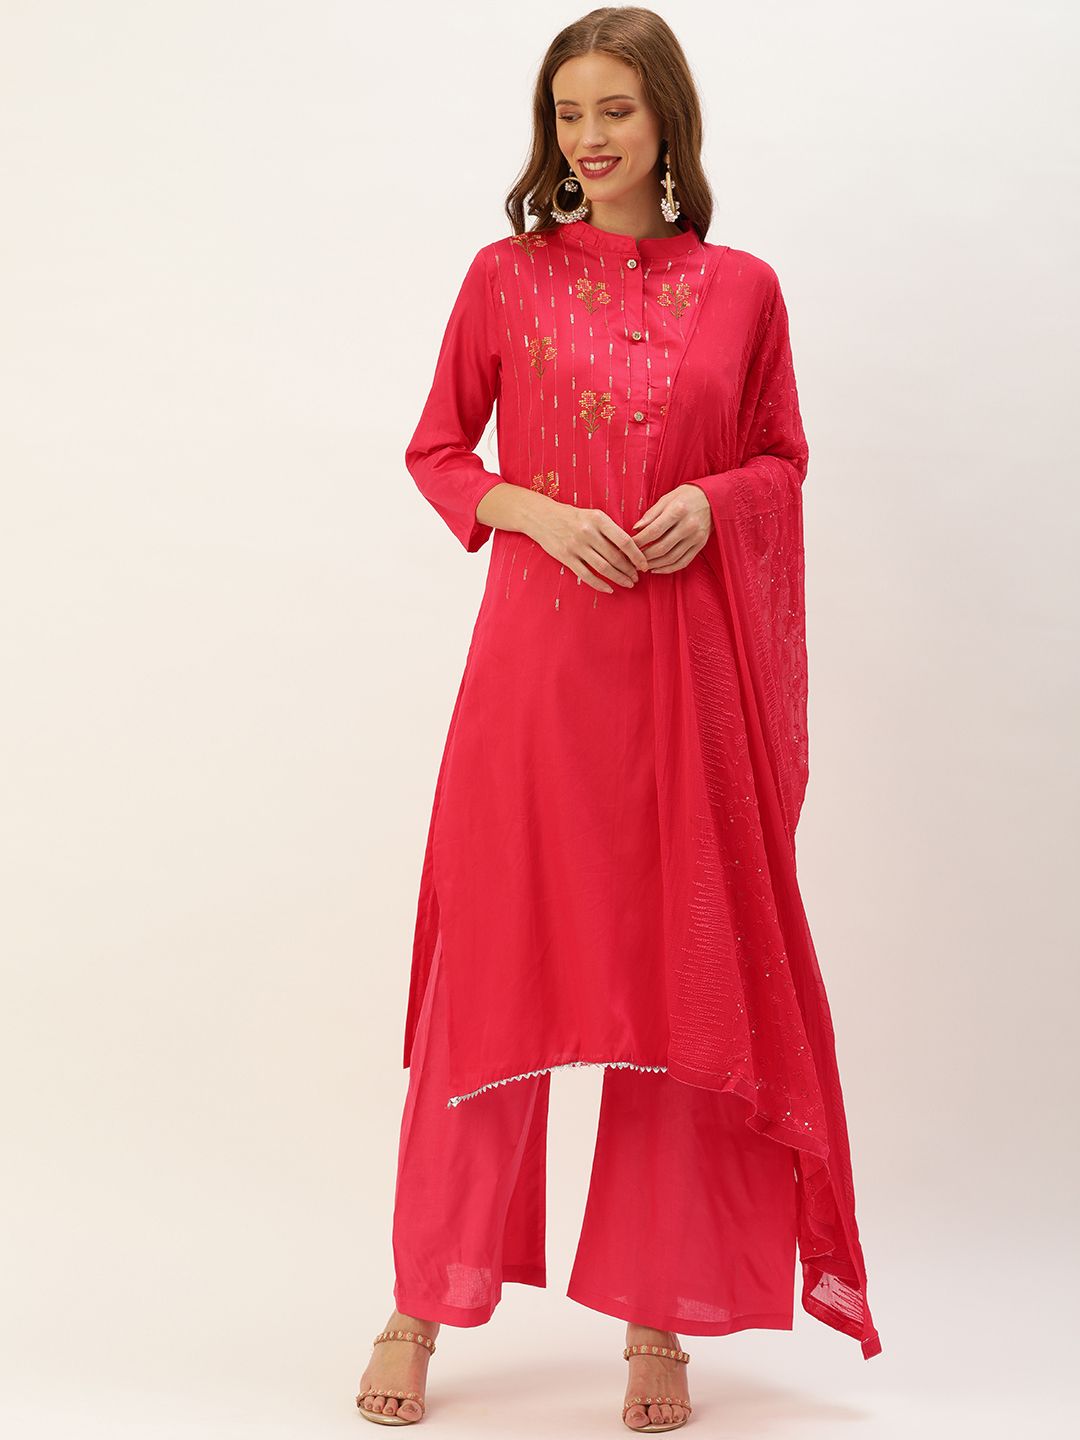 Rajnandini Magenta Pink Pure Cotton Semi-Stitched Dress Material Price in India